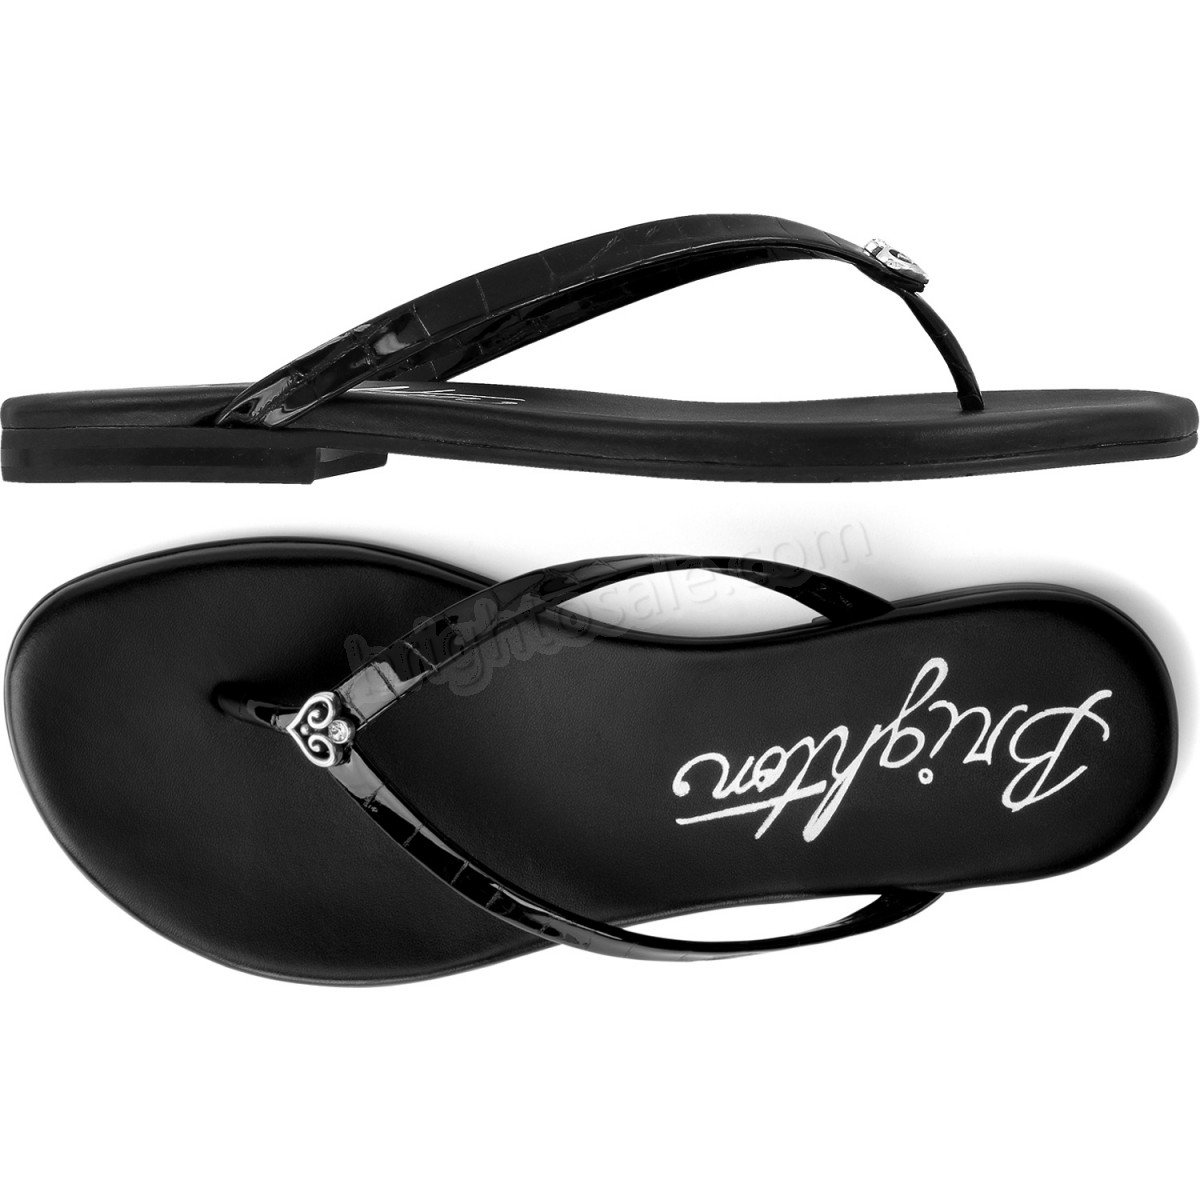 Brighton Collectibles & Online Discount Tonga Sandals - -1